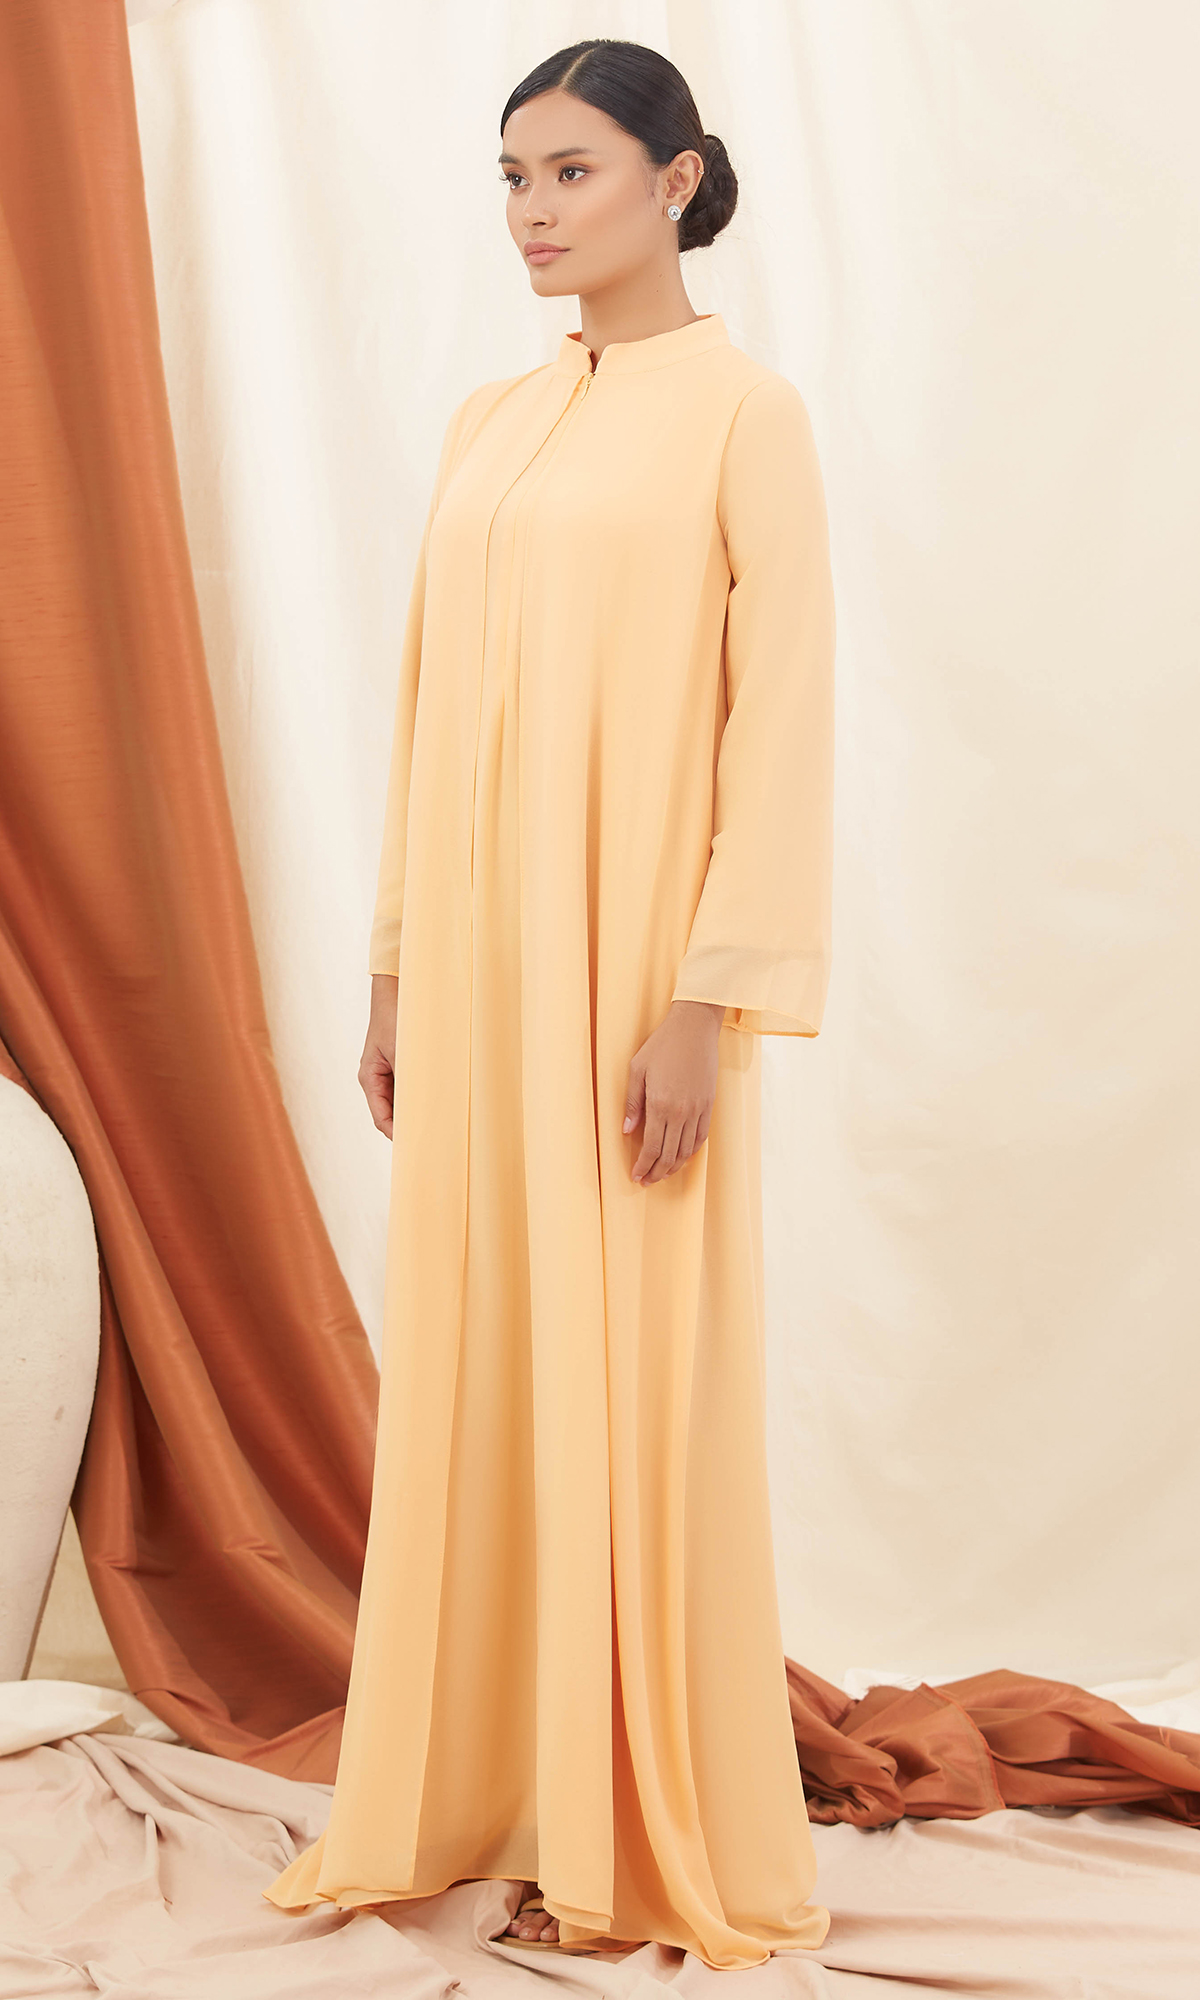 Leanis Dress in Candlelight Orange